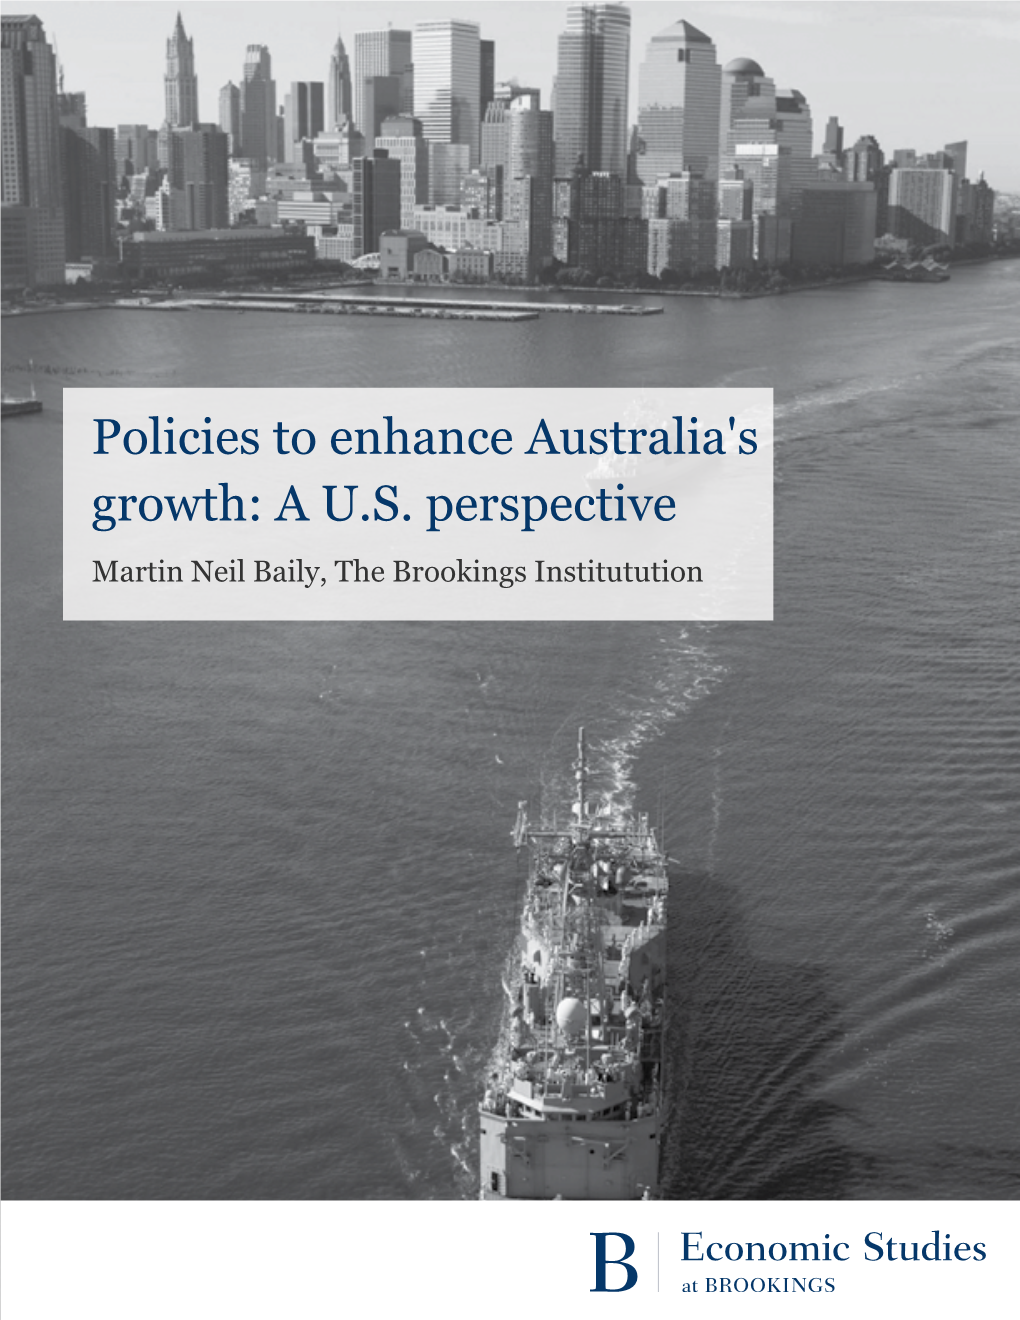 Policies to Enhance Australia's Growth: a U.S. Perspective Martin Neil Baily, the Brookings Institutution ACKNOWLEDGMENTS